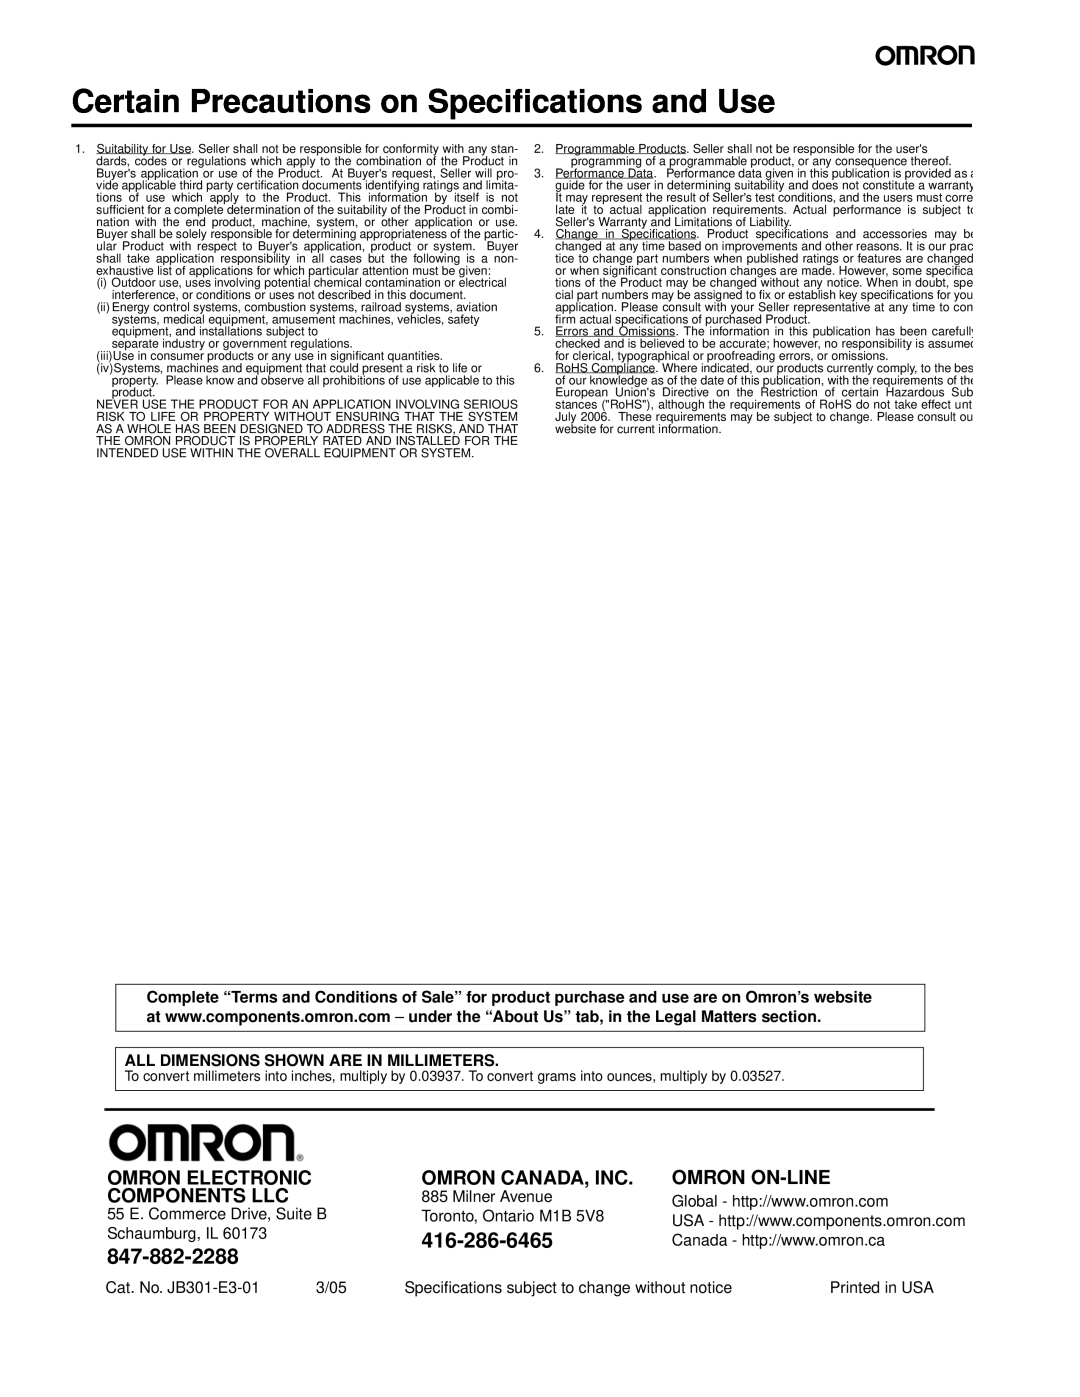 Omron B3F manual Certain Precautions on Specifications and Use, Omron Electronic, Omron Canada, Inc, Omron On-Line 